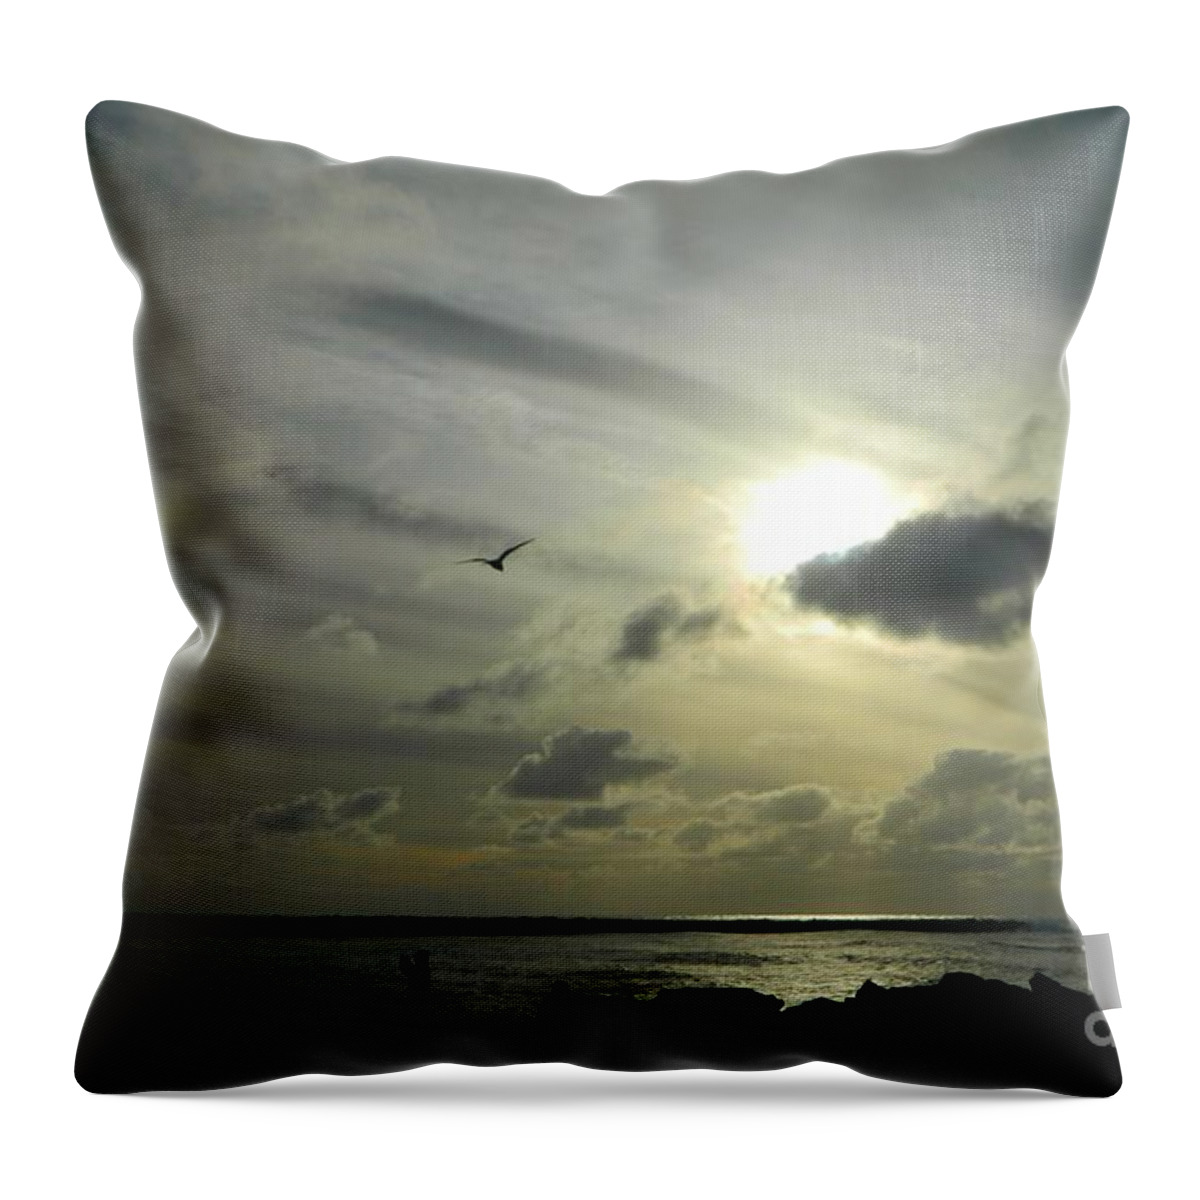 Landscape Throw Pillow featuring the photograph Enjoyment by Gallery Of Hope 